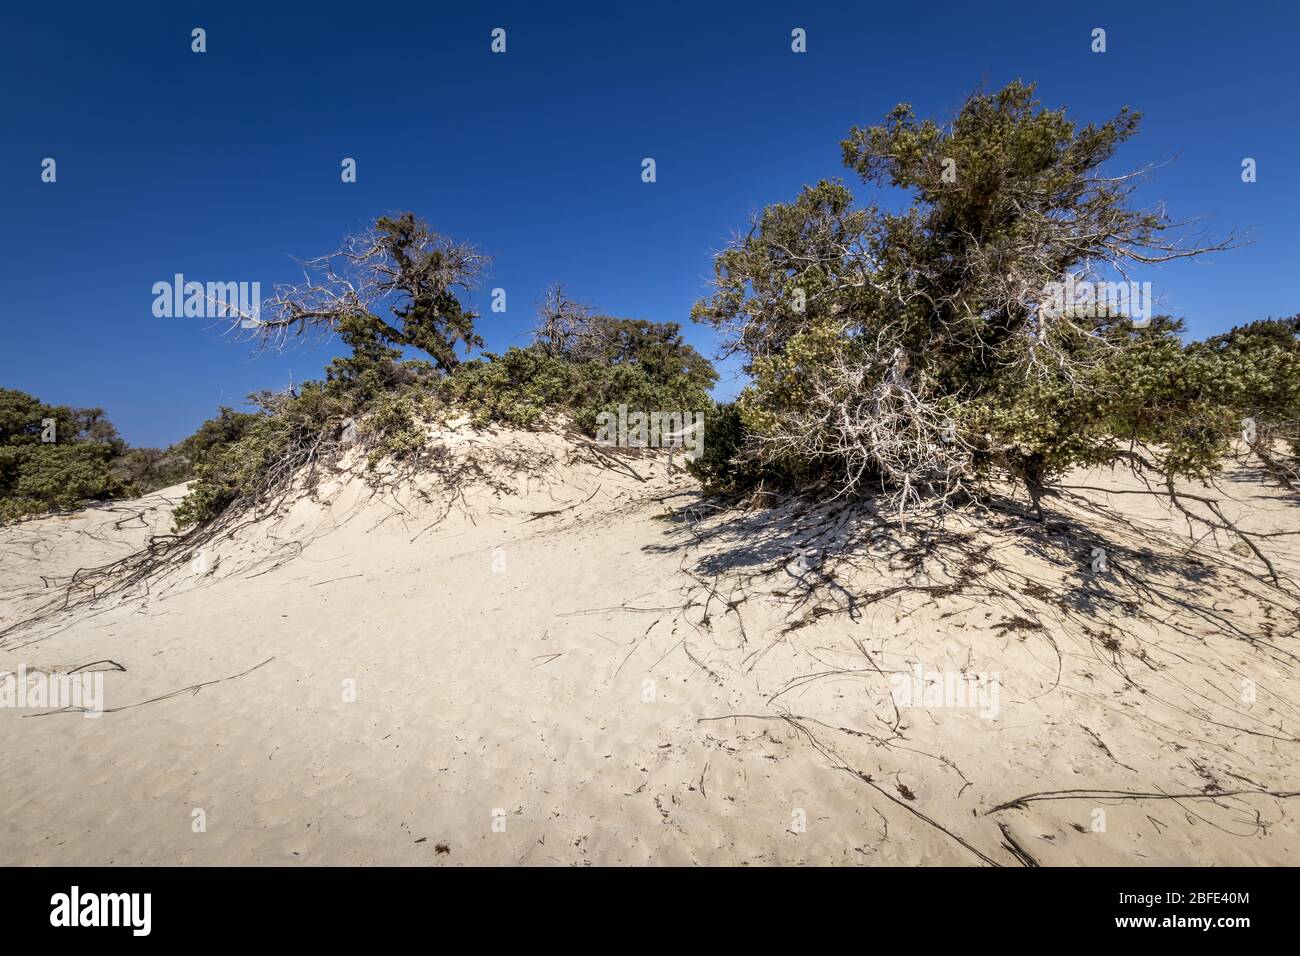 Chrissy island scenery on a sunny summer day with dry trees, white sand and blue clear sky. Crete, Greece. The southernmost island of Europe with a dr Stock Photo